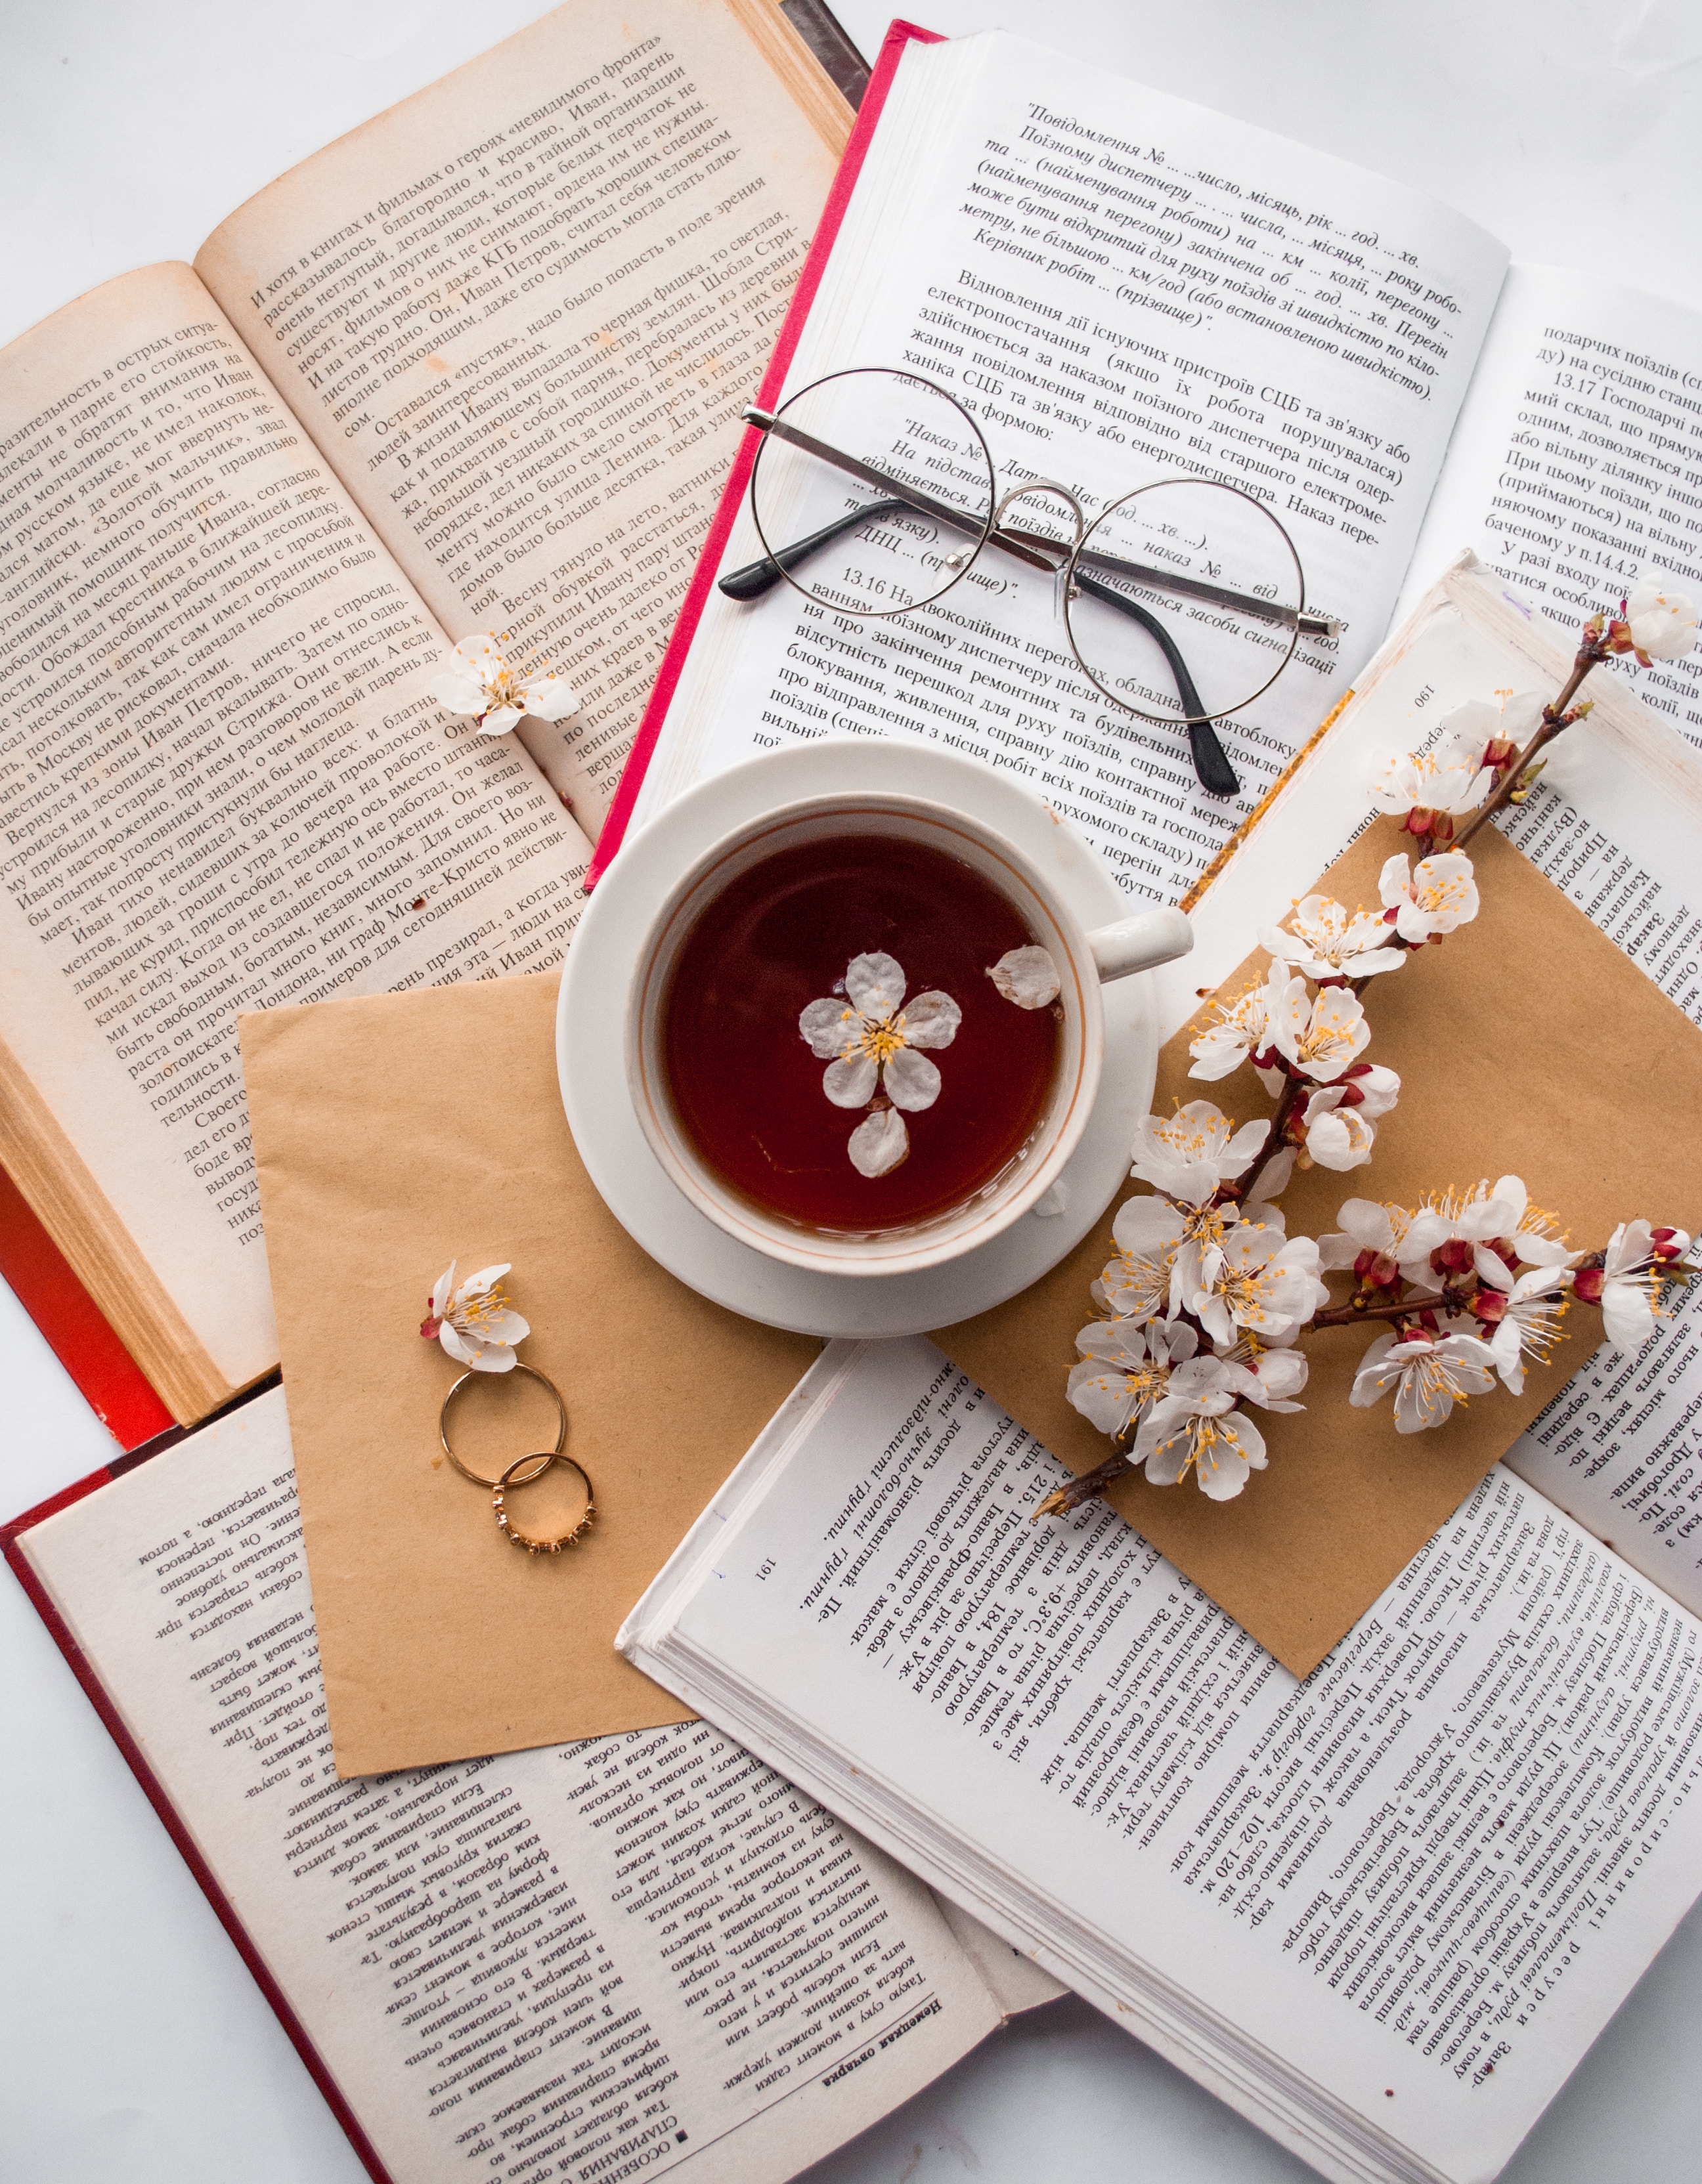 books, flowers, rings, miscellanea, miscellaneous, cup, glasses, spectacles